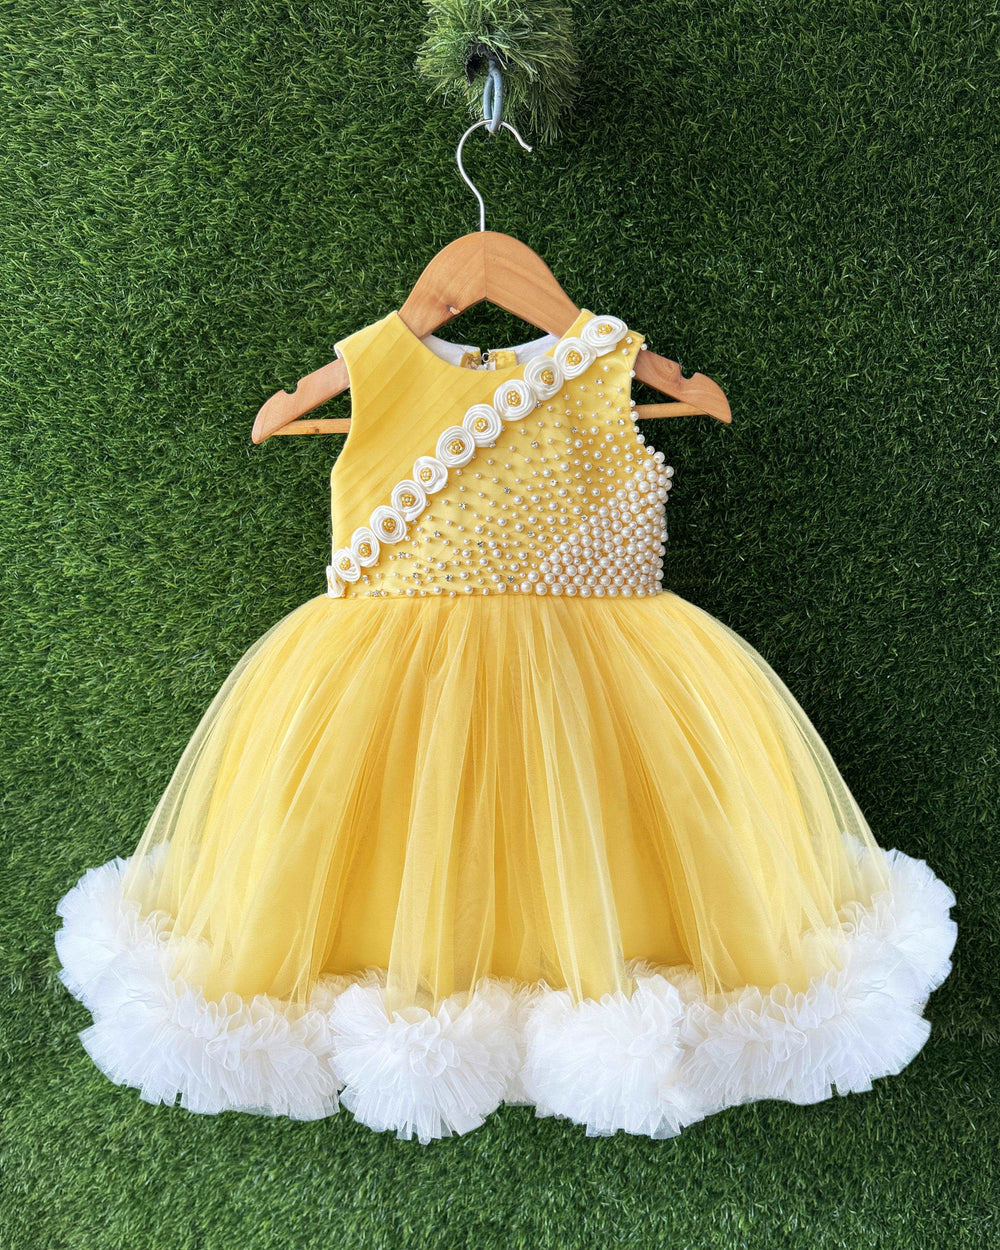 Baby Yellow & White combo Baby-Girls Pearl Work Flower Frock

Material: Baby yellow &amp; White combo pearl work handmade flower frock is made with soft nylon net fabric. The one side of the yoke part is made pleated pattern 